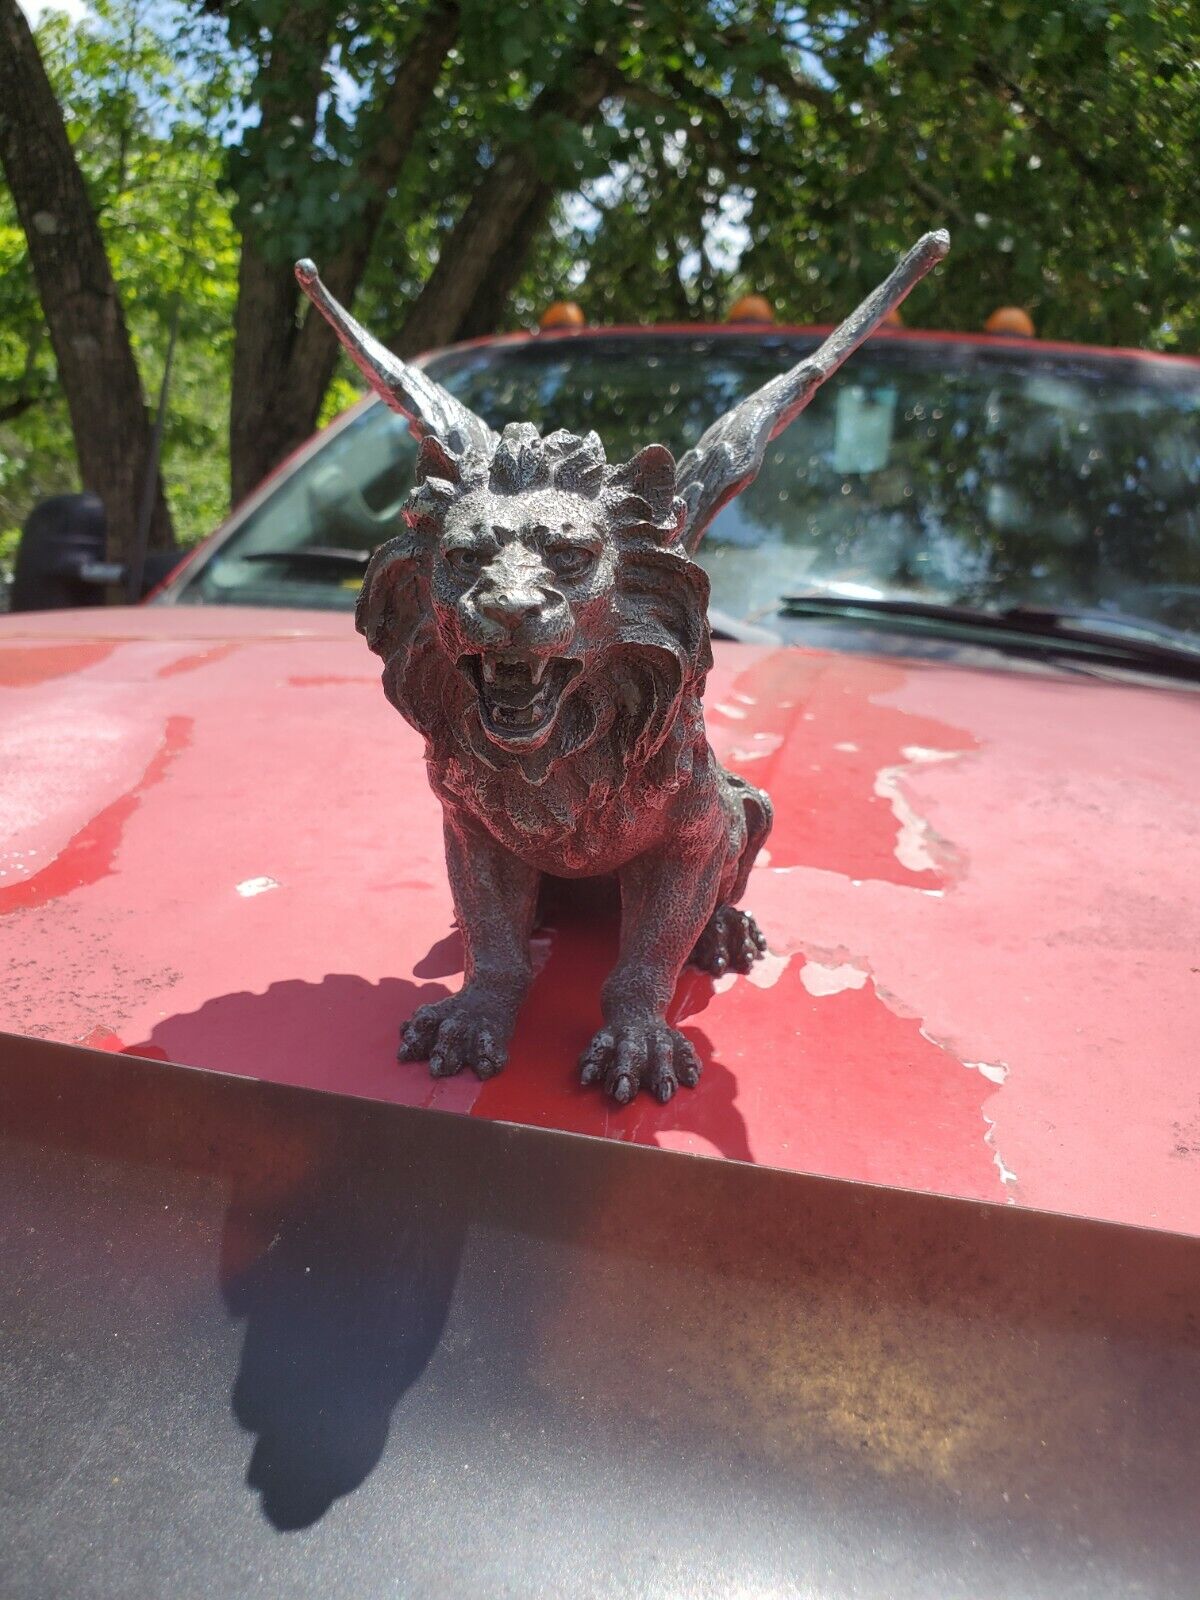 RARE HOOD ORNAMENT RAT ROD BIG RIG TRUCK WINGED LION 🦁 GRIFFIN MYTHICAL BEAST 